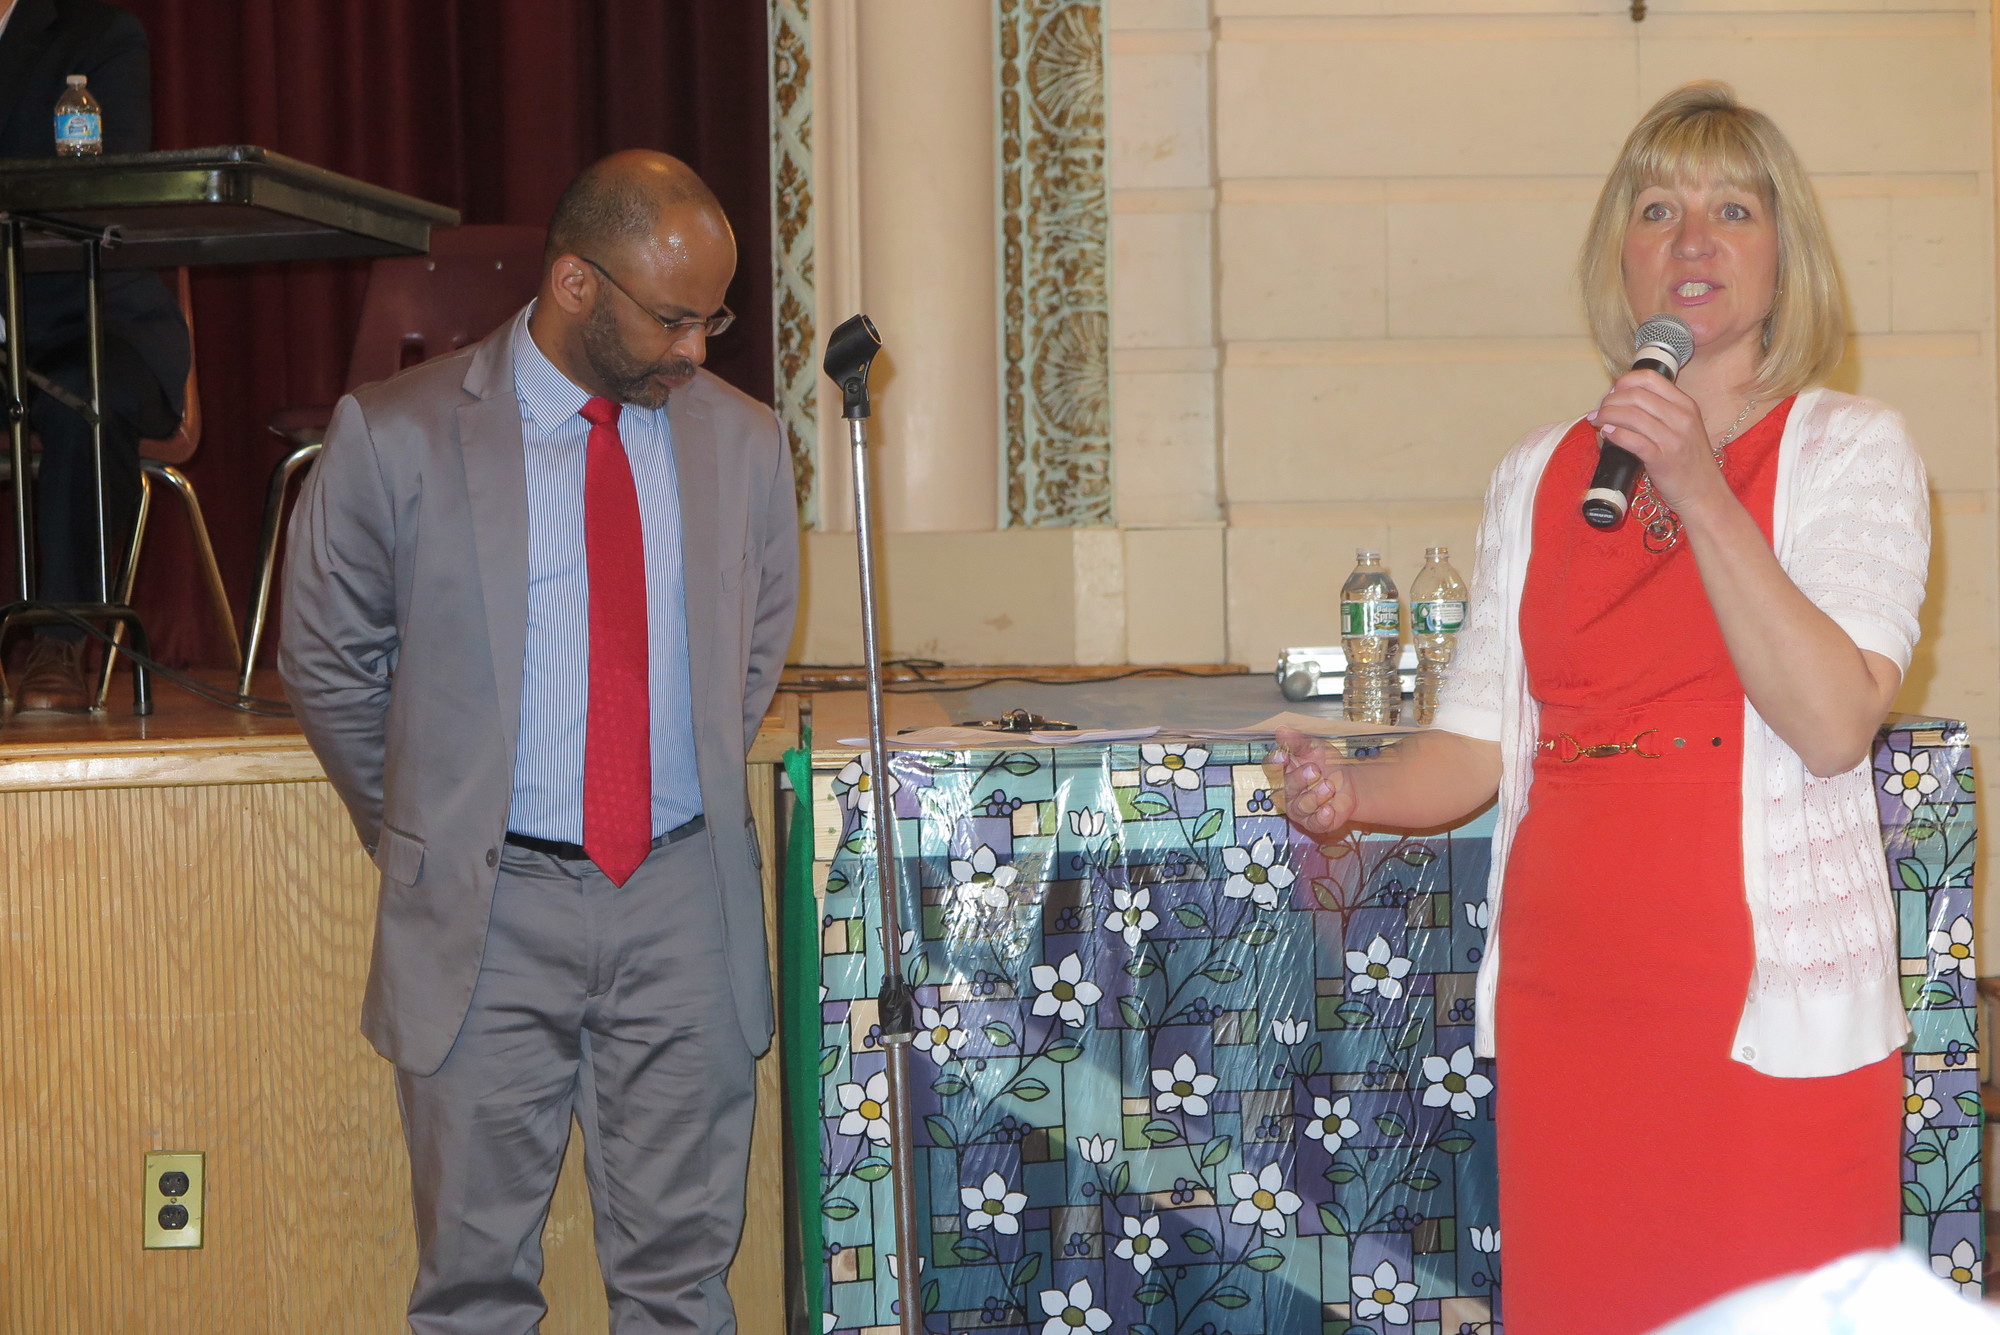 Michael A. Jaime, president of the Elmont School District Board of Education, and Laura Ferone, president of the Floral Park-Bellerose school board, moderated the event, asking executives from the Cosmos and the Mattone Group questions about their $400 million proposal.